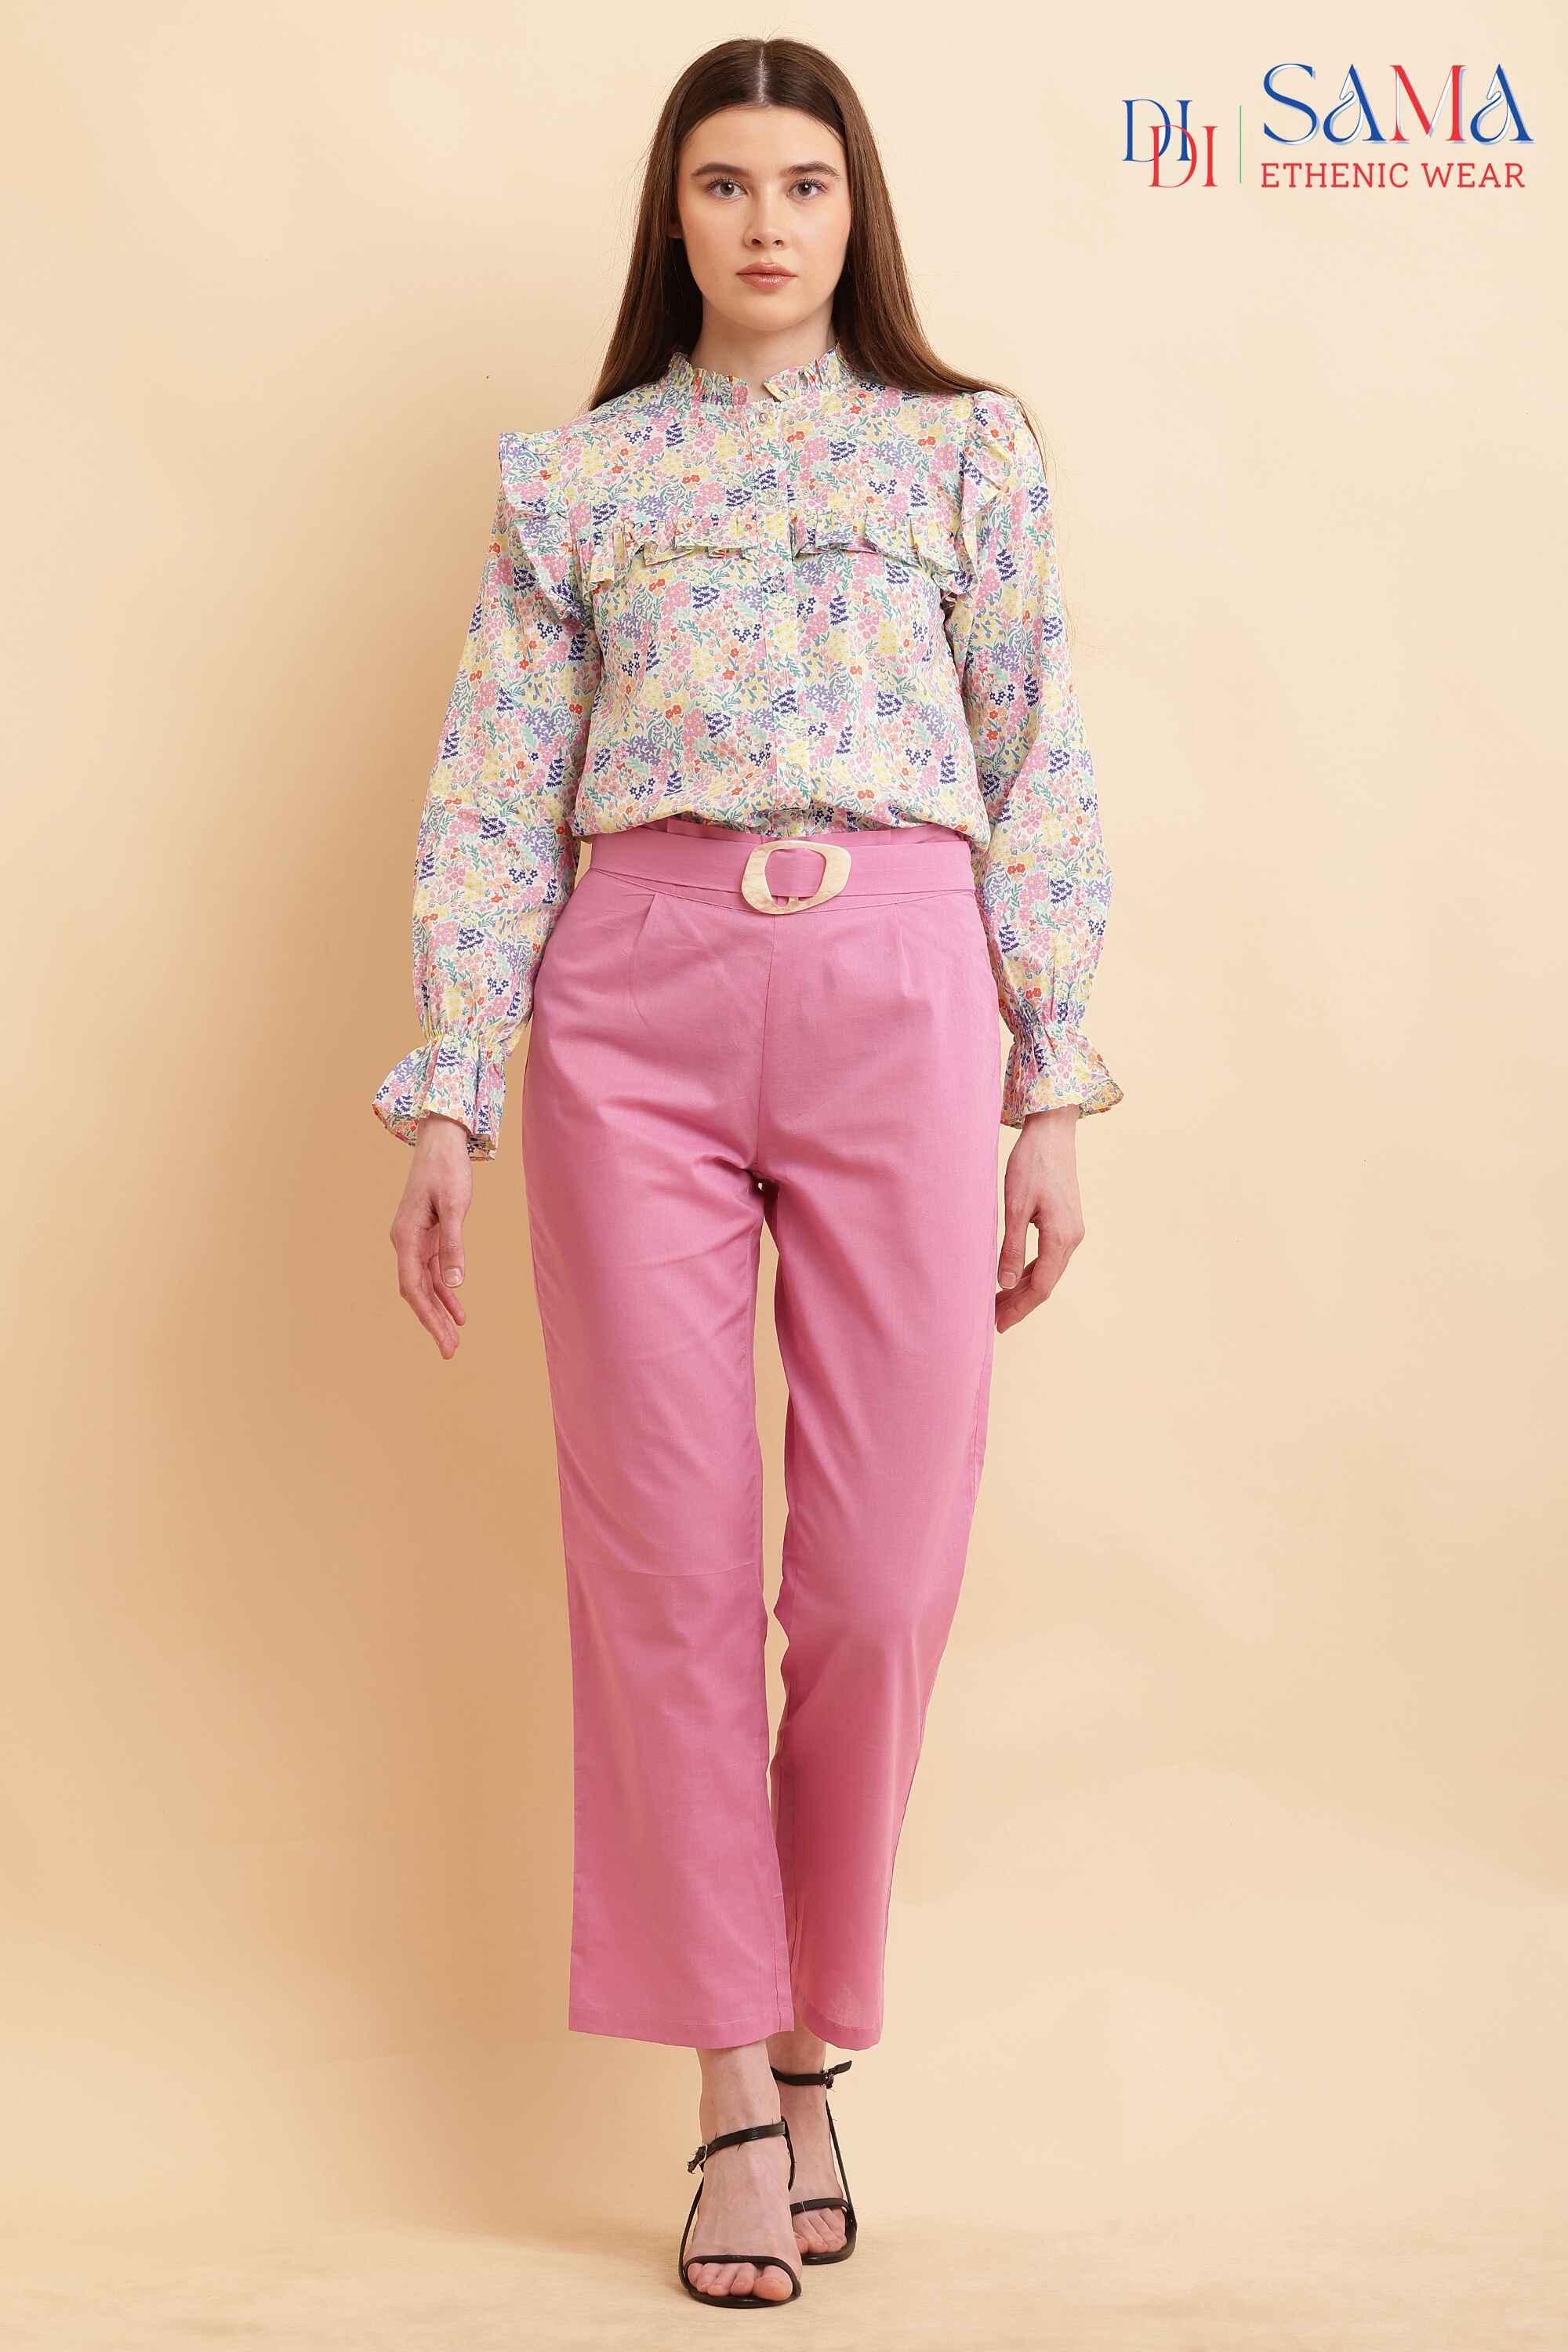 Designer Ruffle Printed Shirt with Belted Pink Pant 